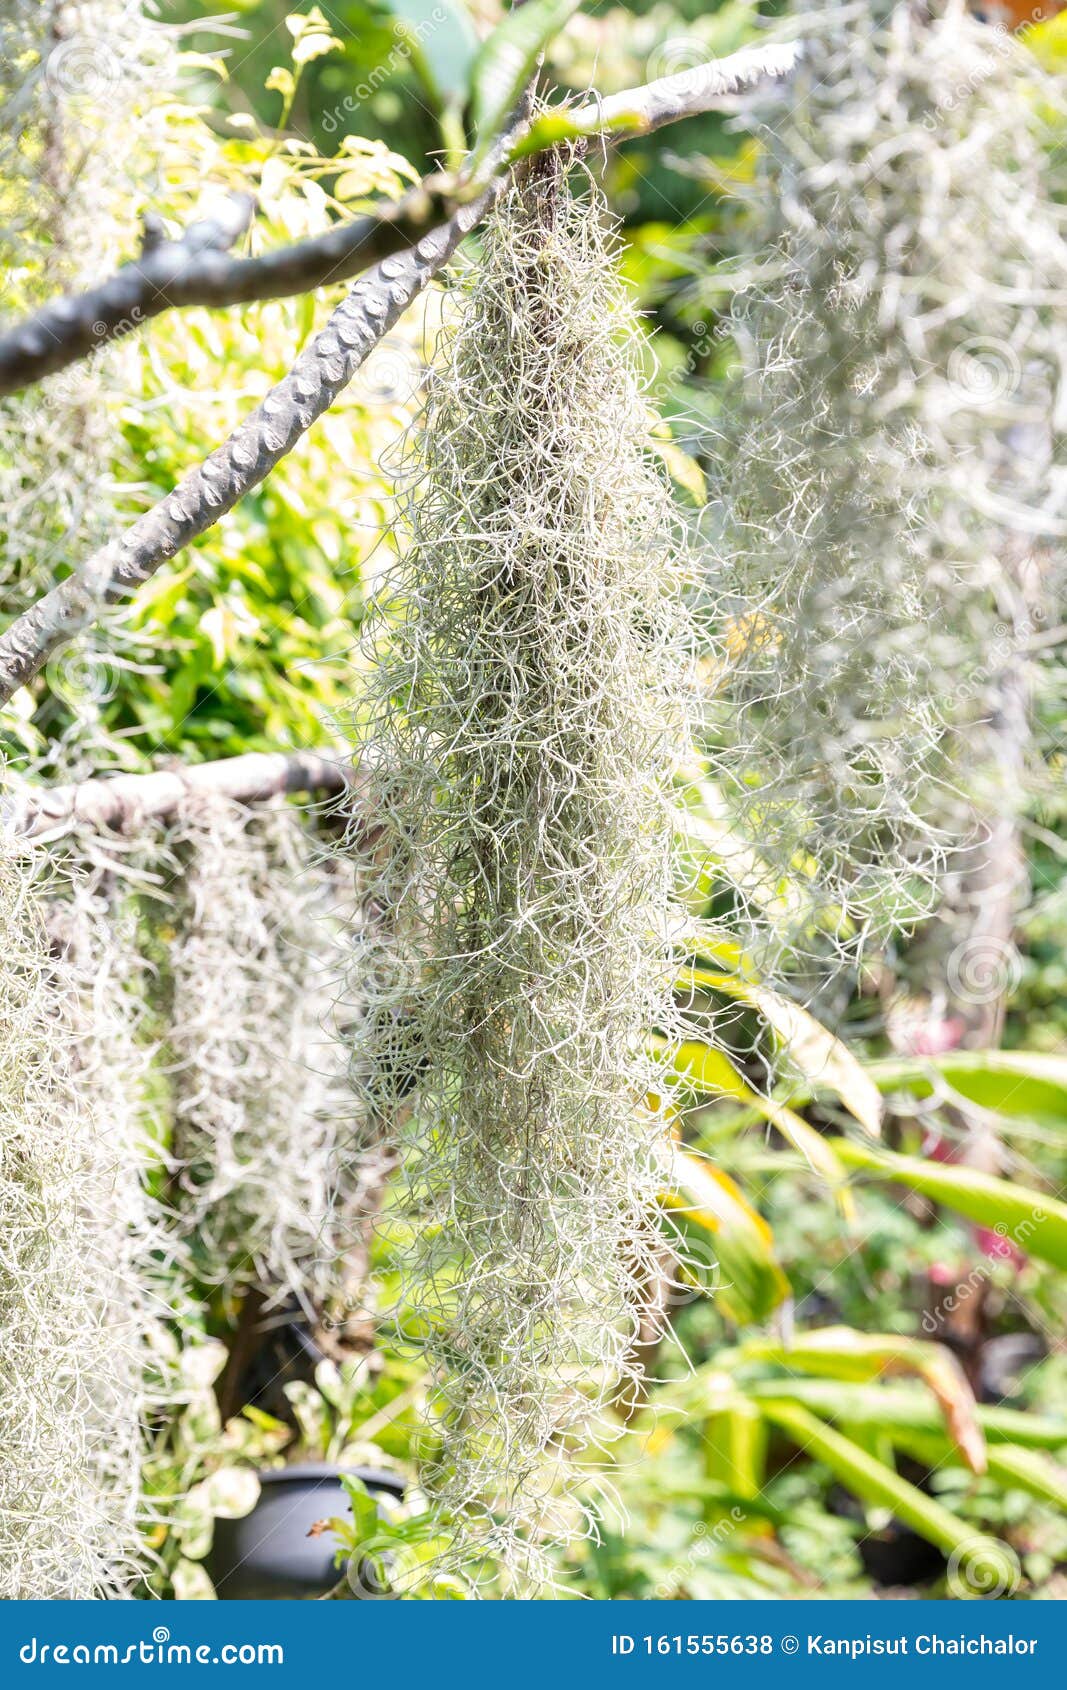 Natural `curtain` Formed By Spanish Moss. Spanish Moss ...